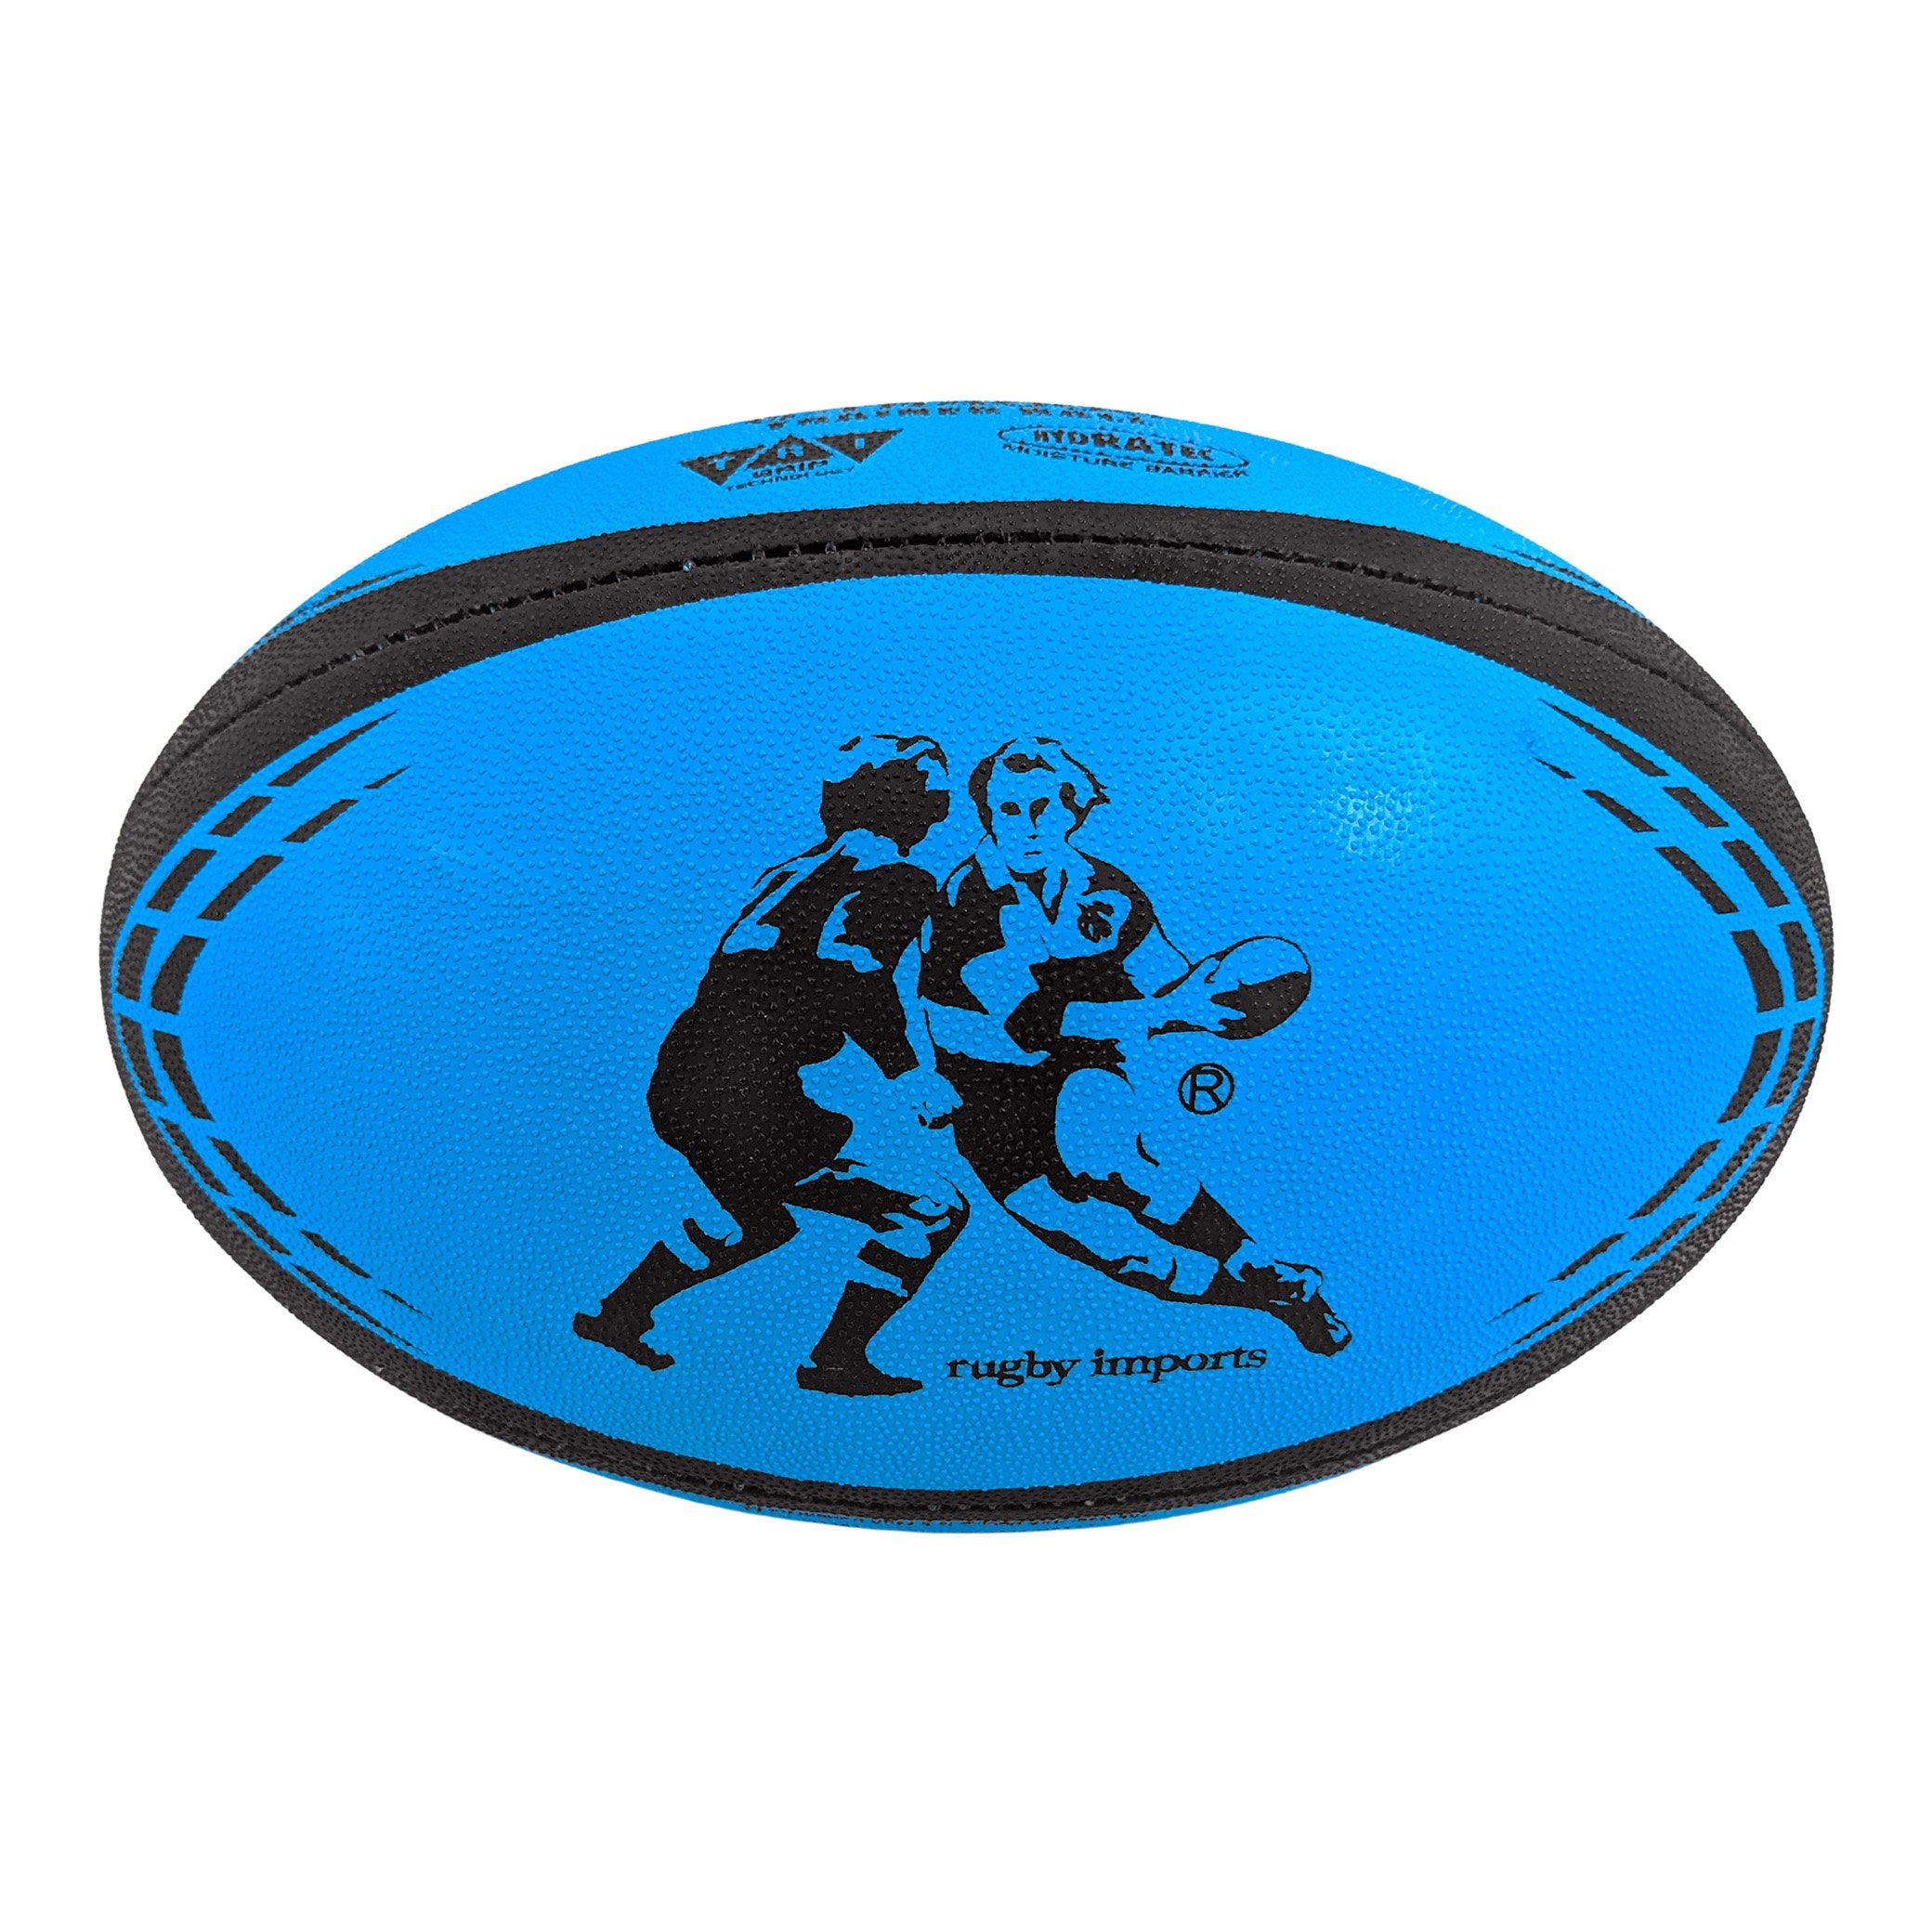 Neon Blue  Soft Youth Boys Protective Athletic Sport Cup – The